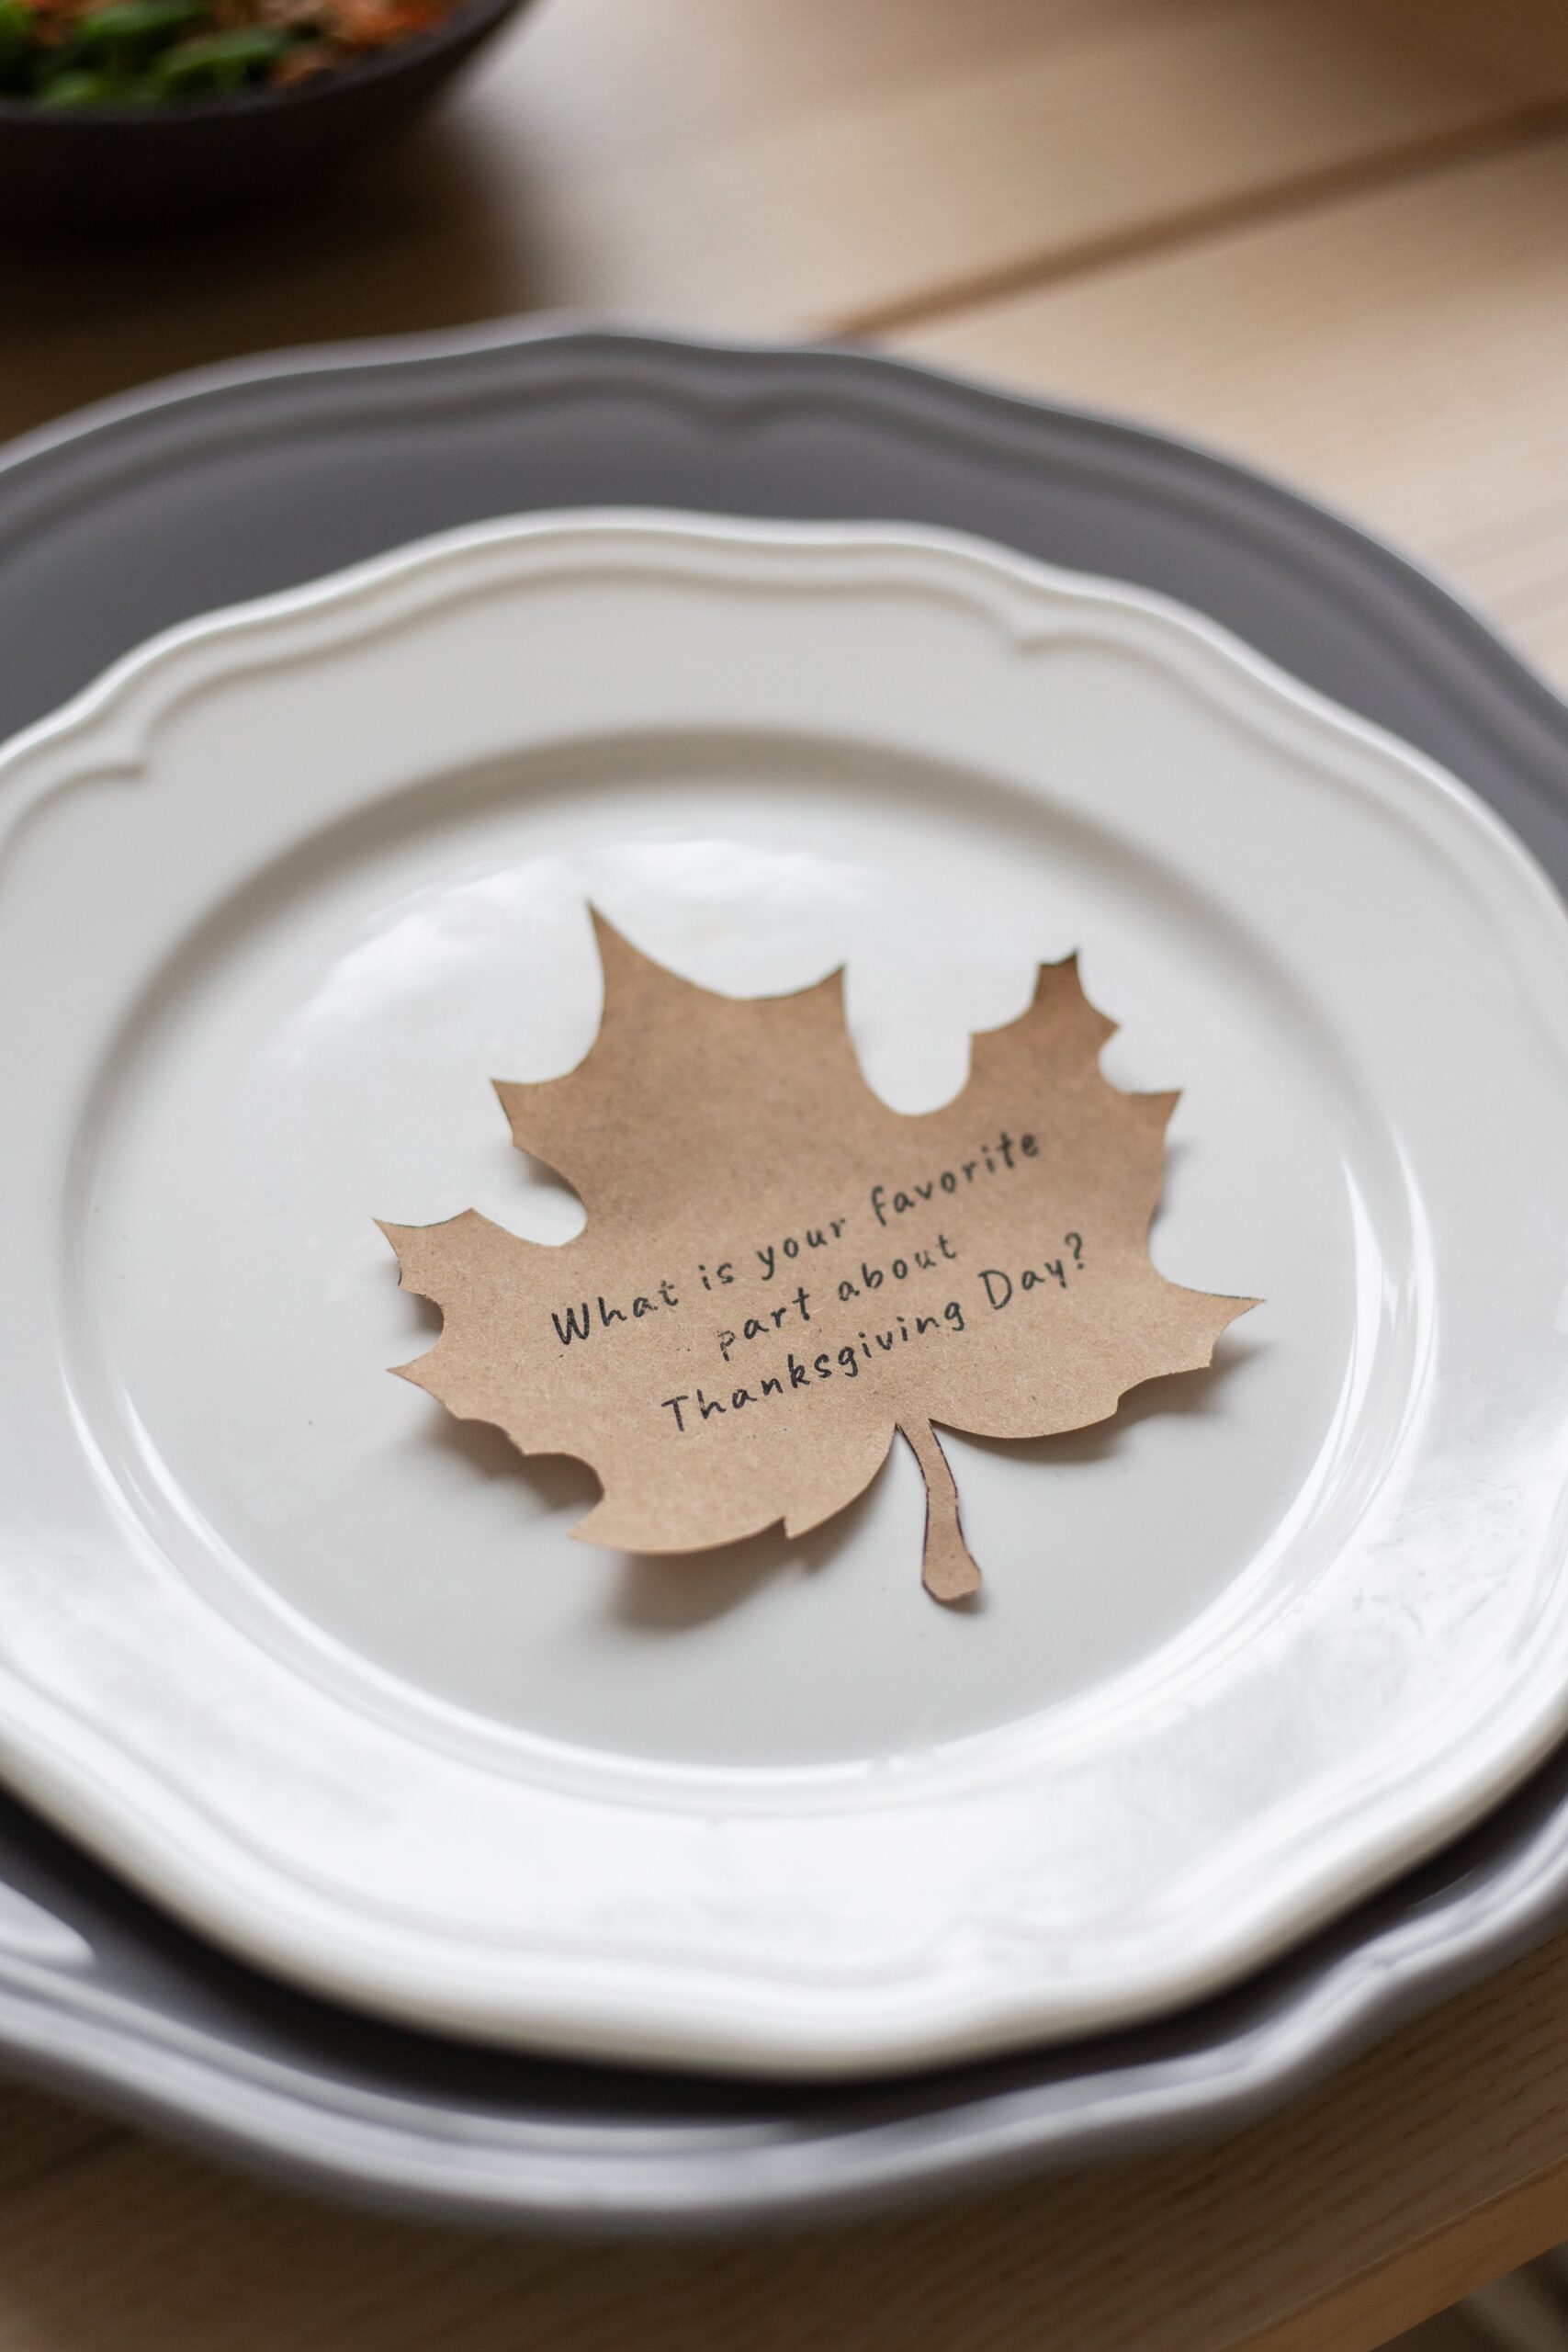 One fall decorating idea is having a paper leaf cutout and sitting on the plate